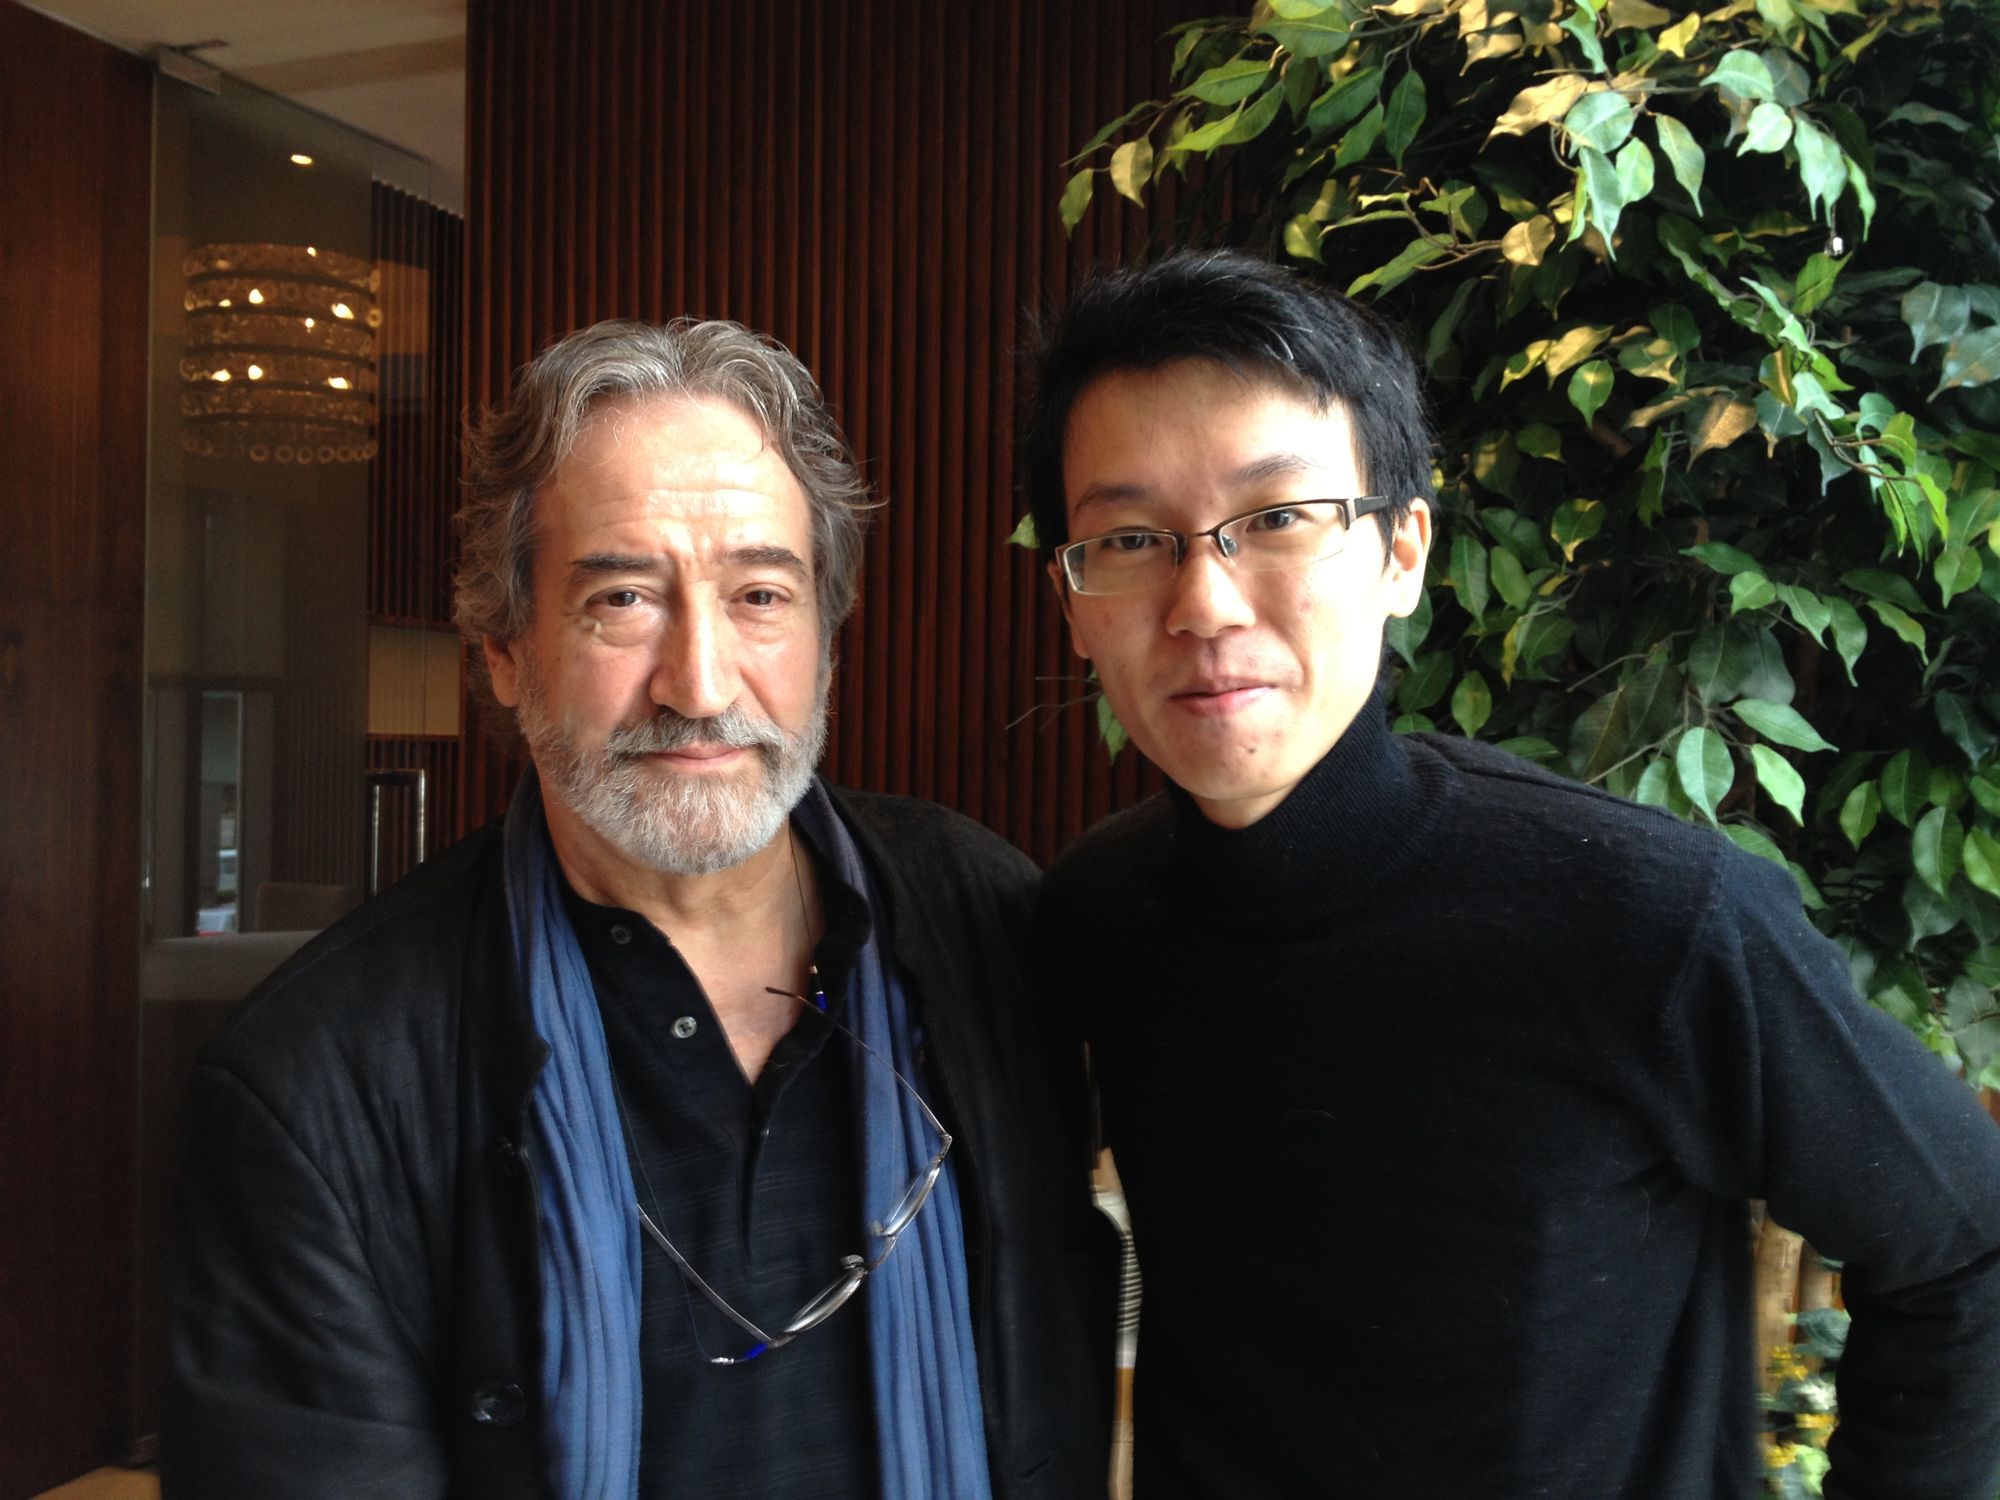 Jordi Savall and Dennis Wu, picture taken after an interview session with the gambist and a nice coffee (tea for Jordi)